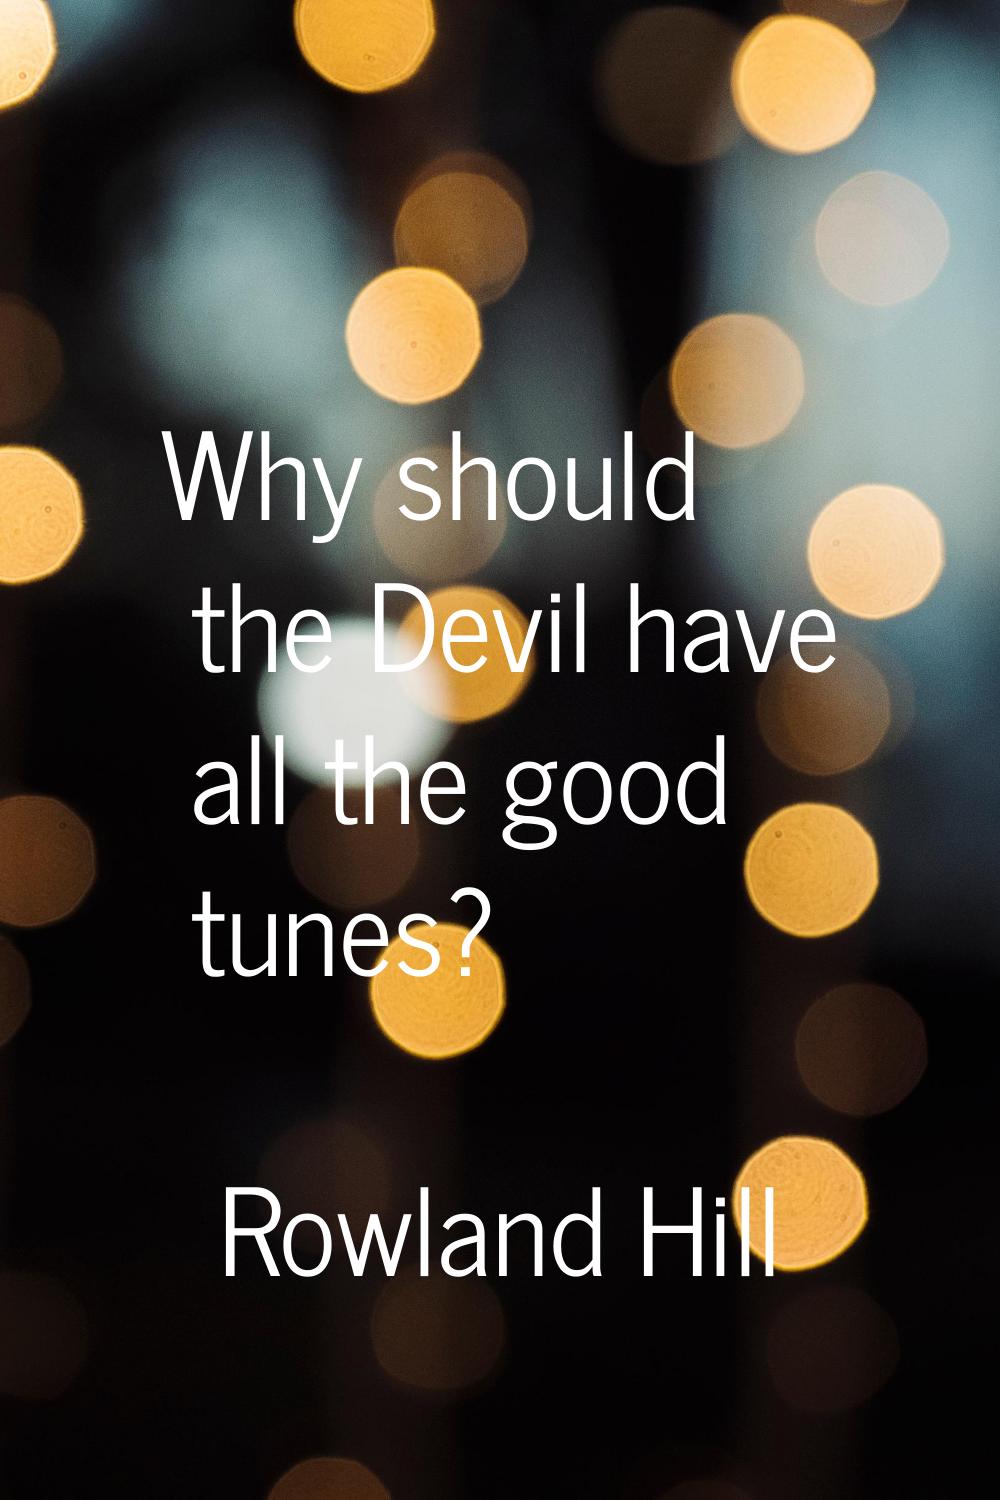 Why should the Devil have all the good tunes?